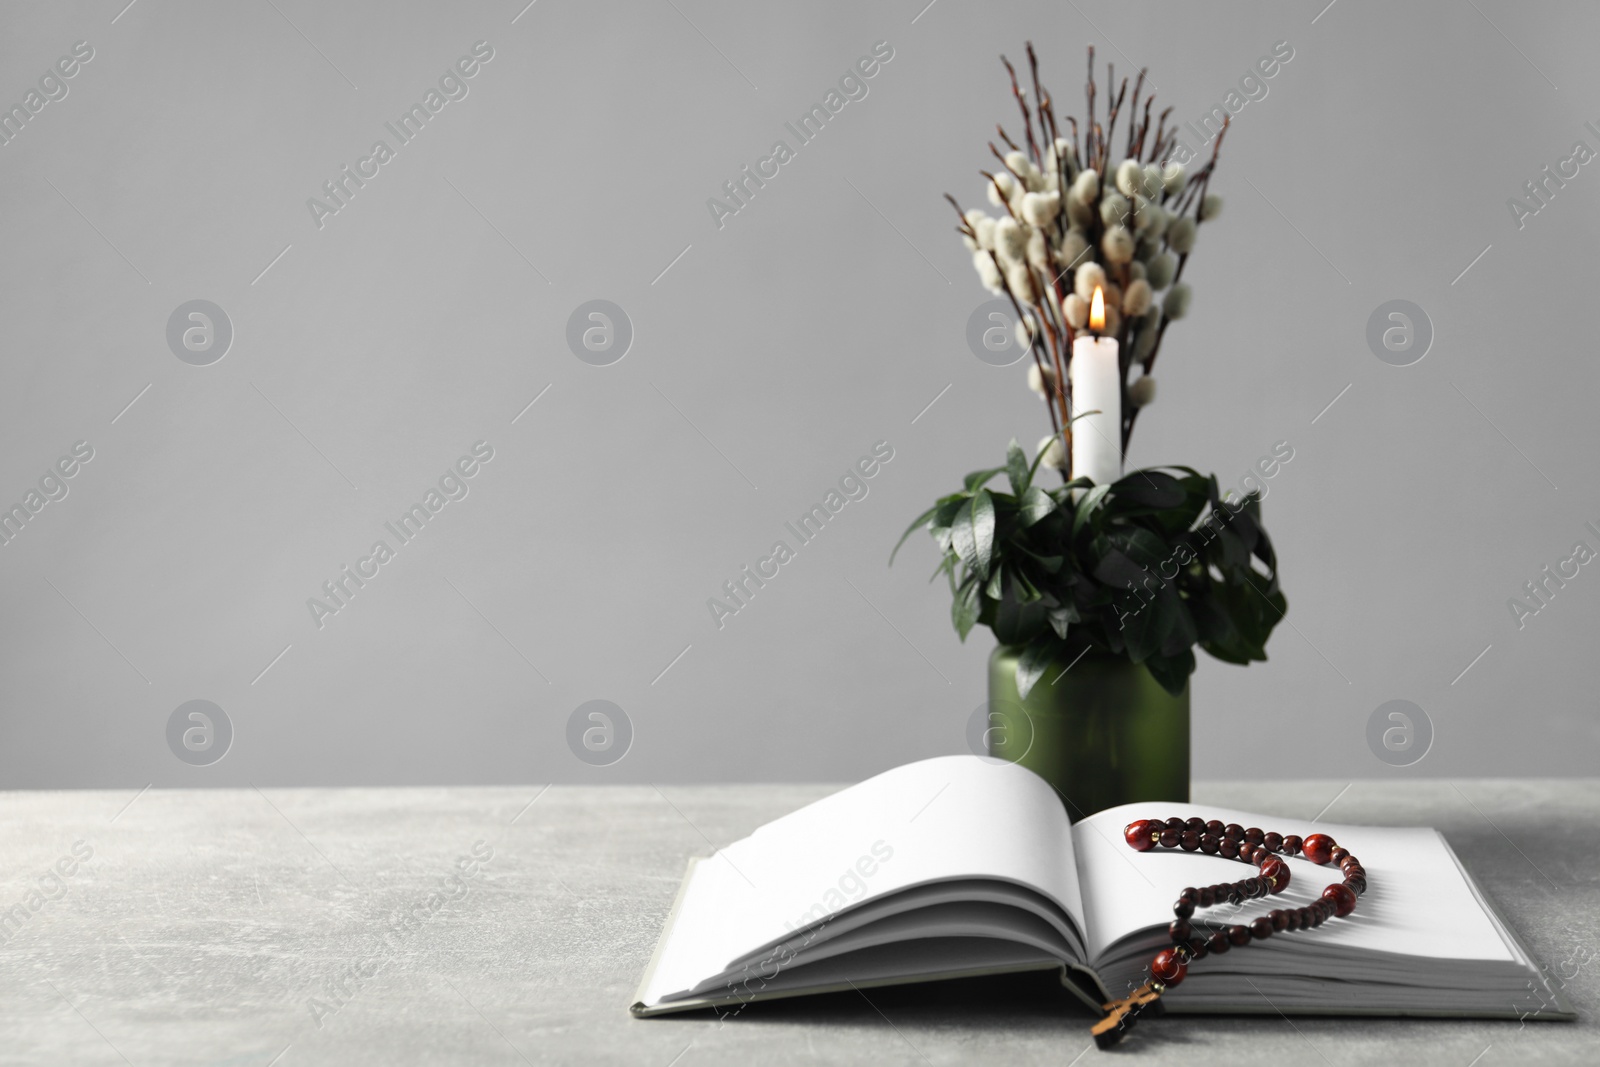 Photo of Burning candle, plant with willow branches, Bible and rosary beads on grey table, space for text